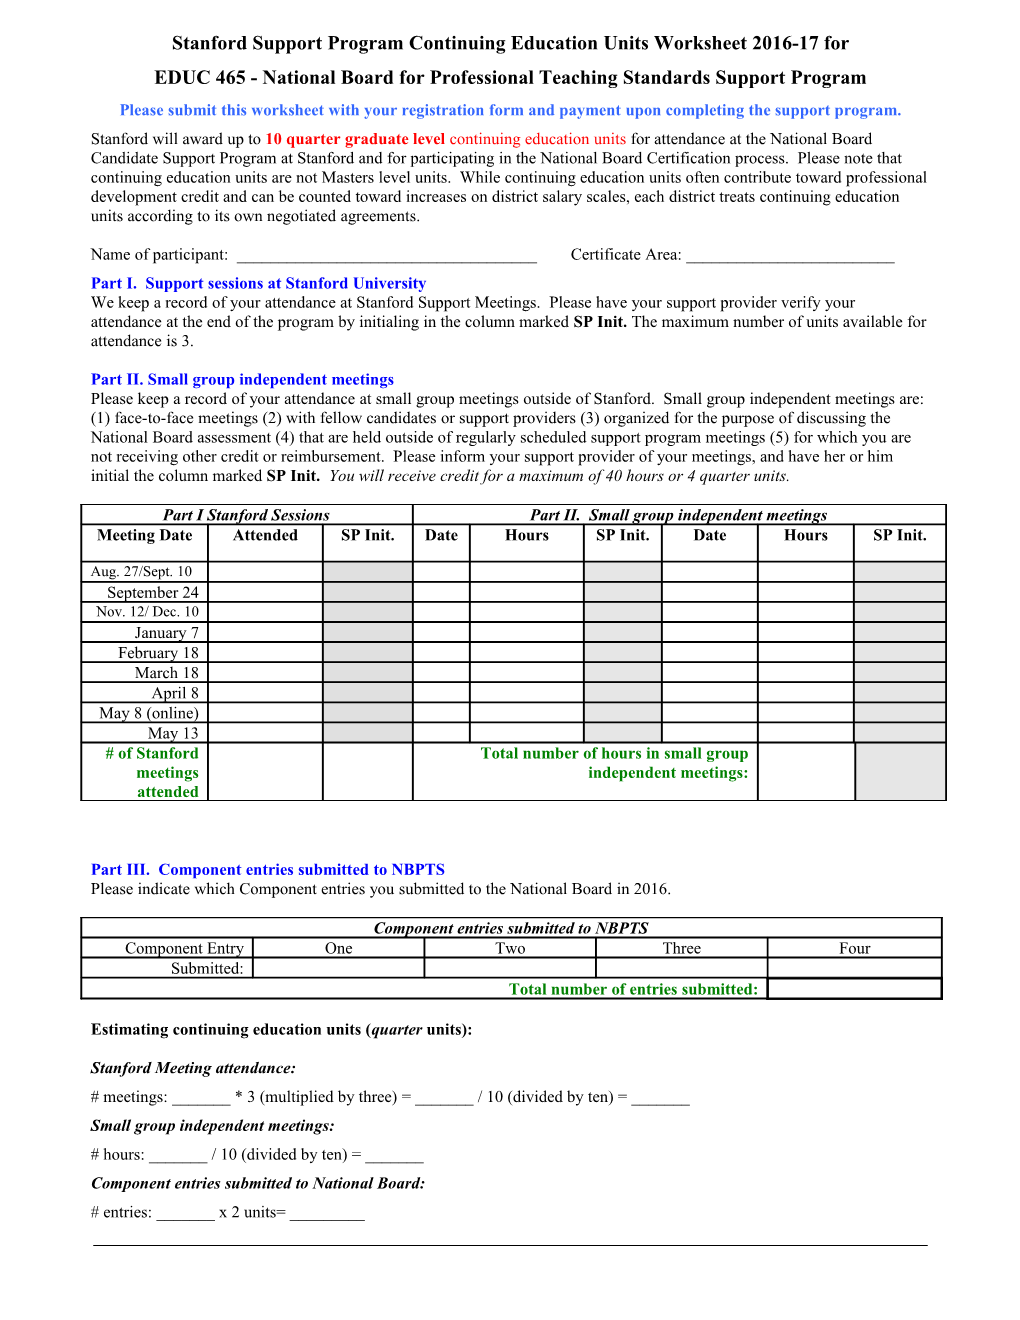 Continuing Education Units Worksheet (To Be Completed by the Certificate Area Support Provider)